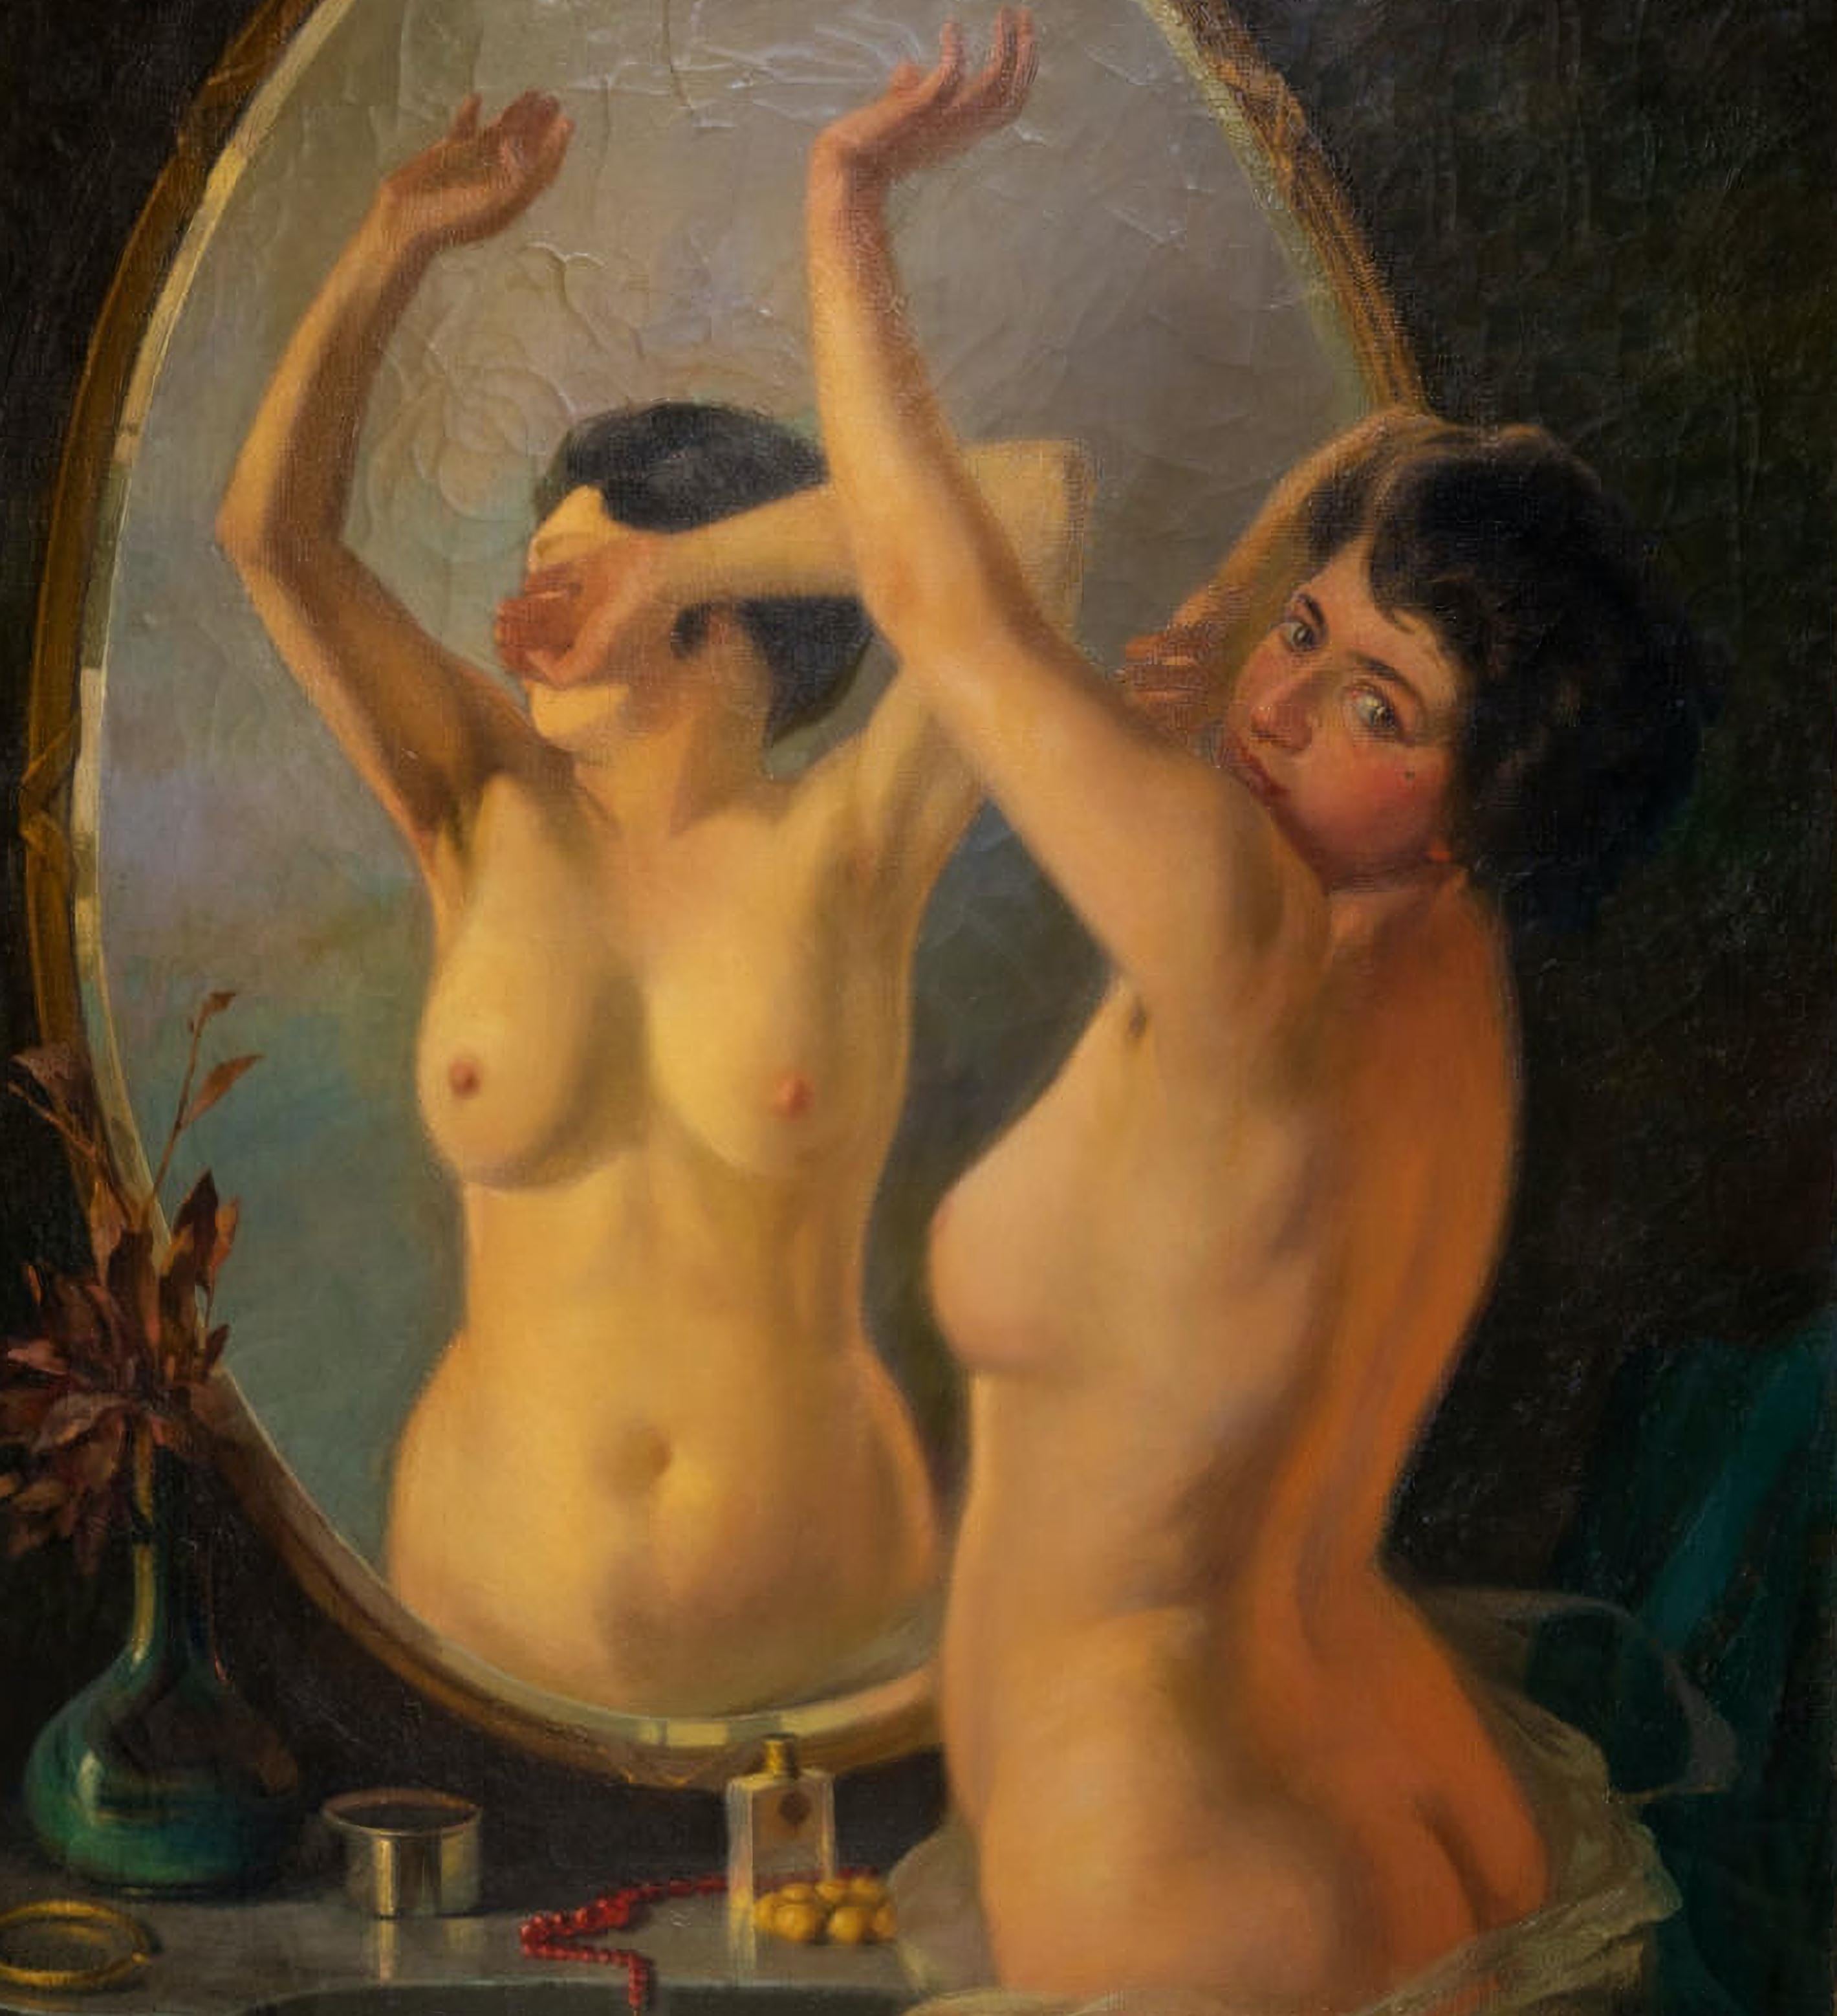 Paint Italian School of the Early 20th Century Nude Woman in the Mirror Art Deco